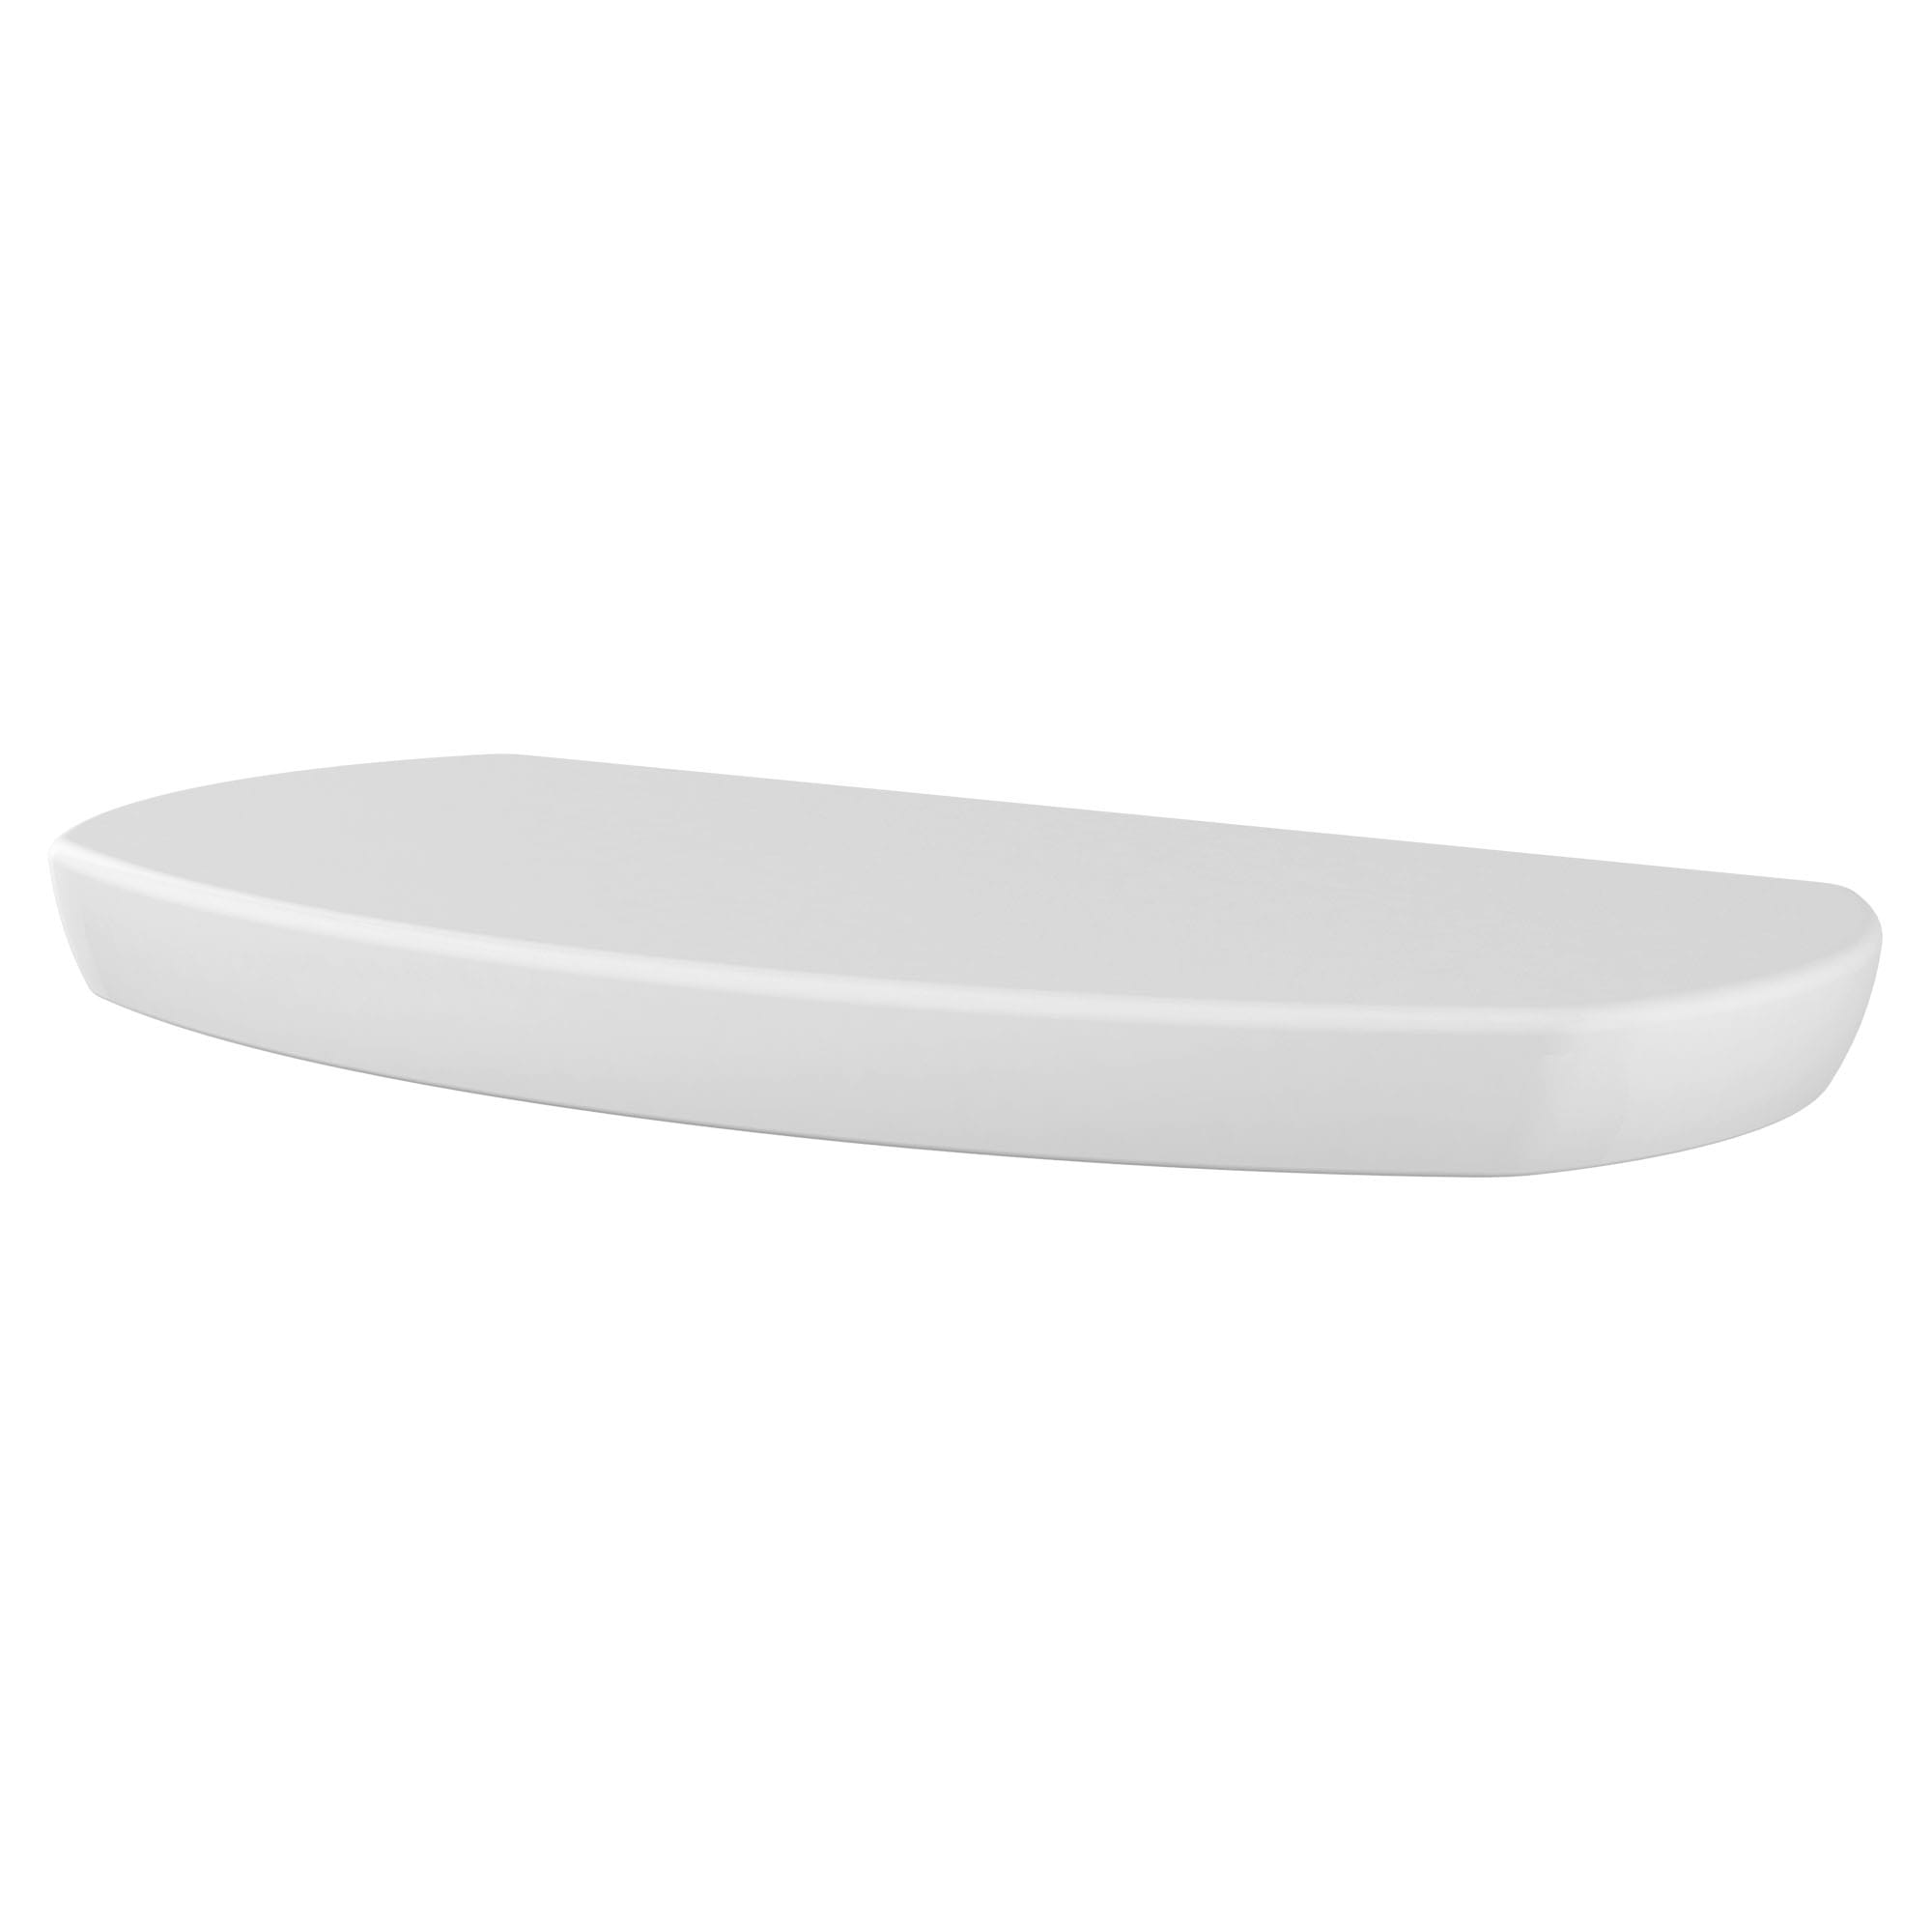 Cadet PRO 12 Inch Rough Toilet Tank Cover WHITE